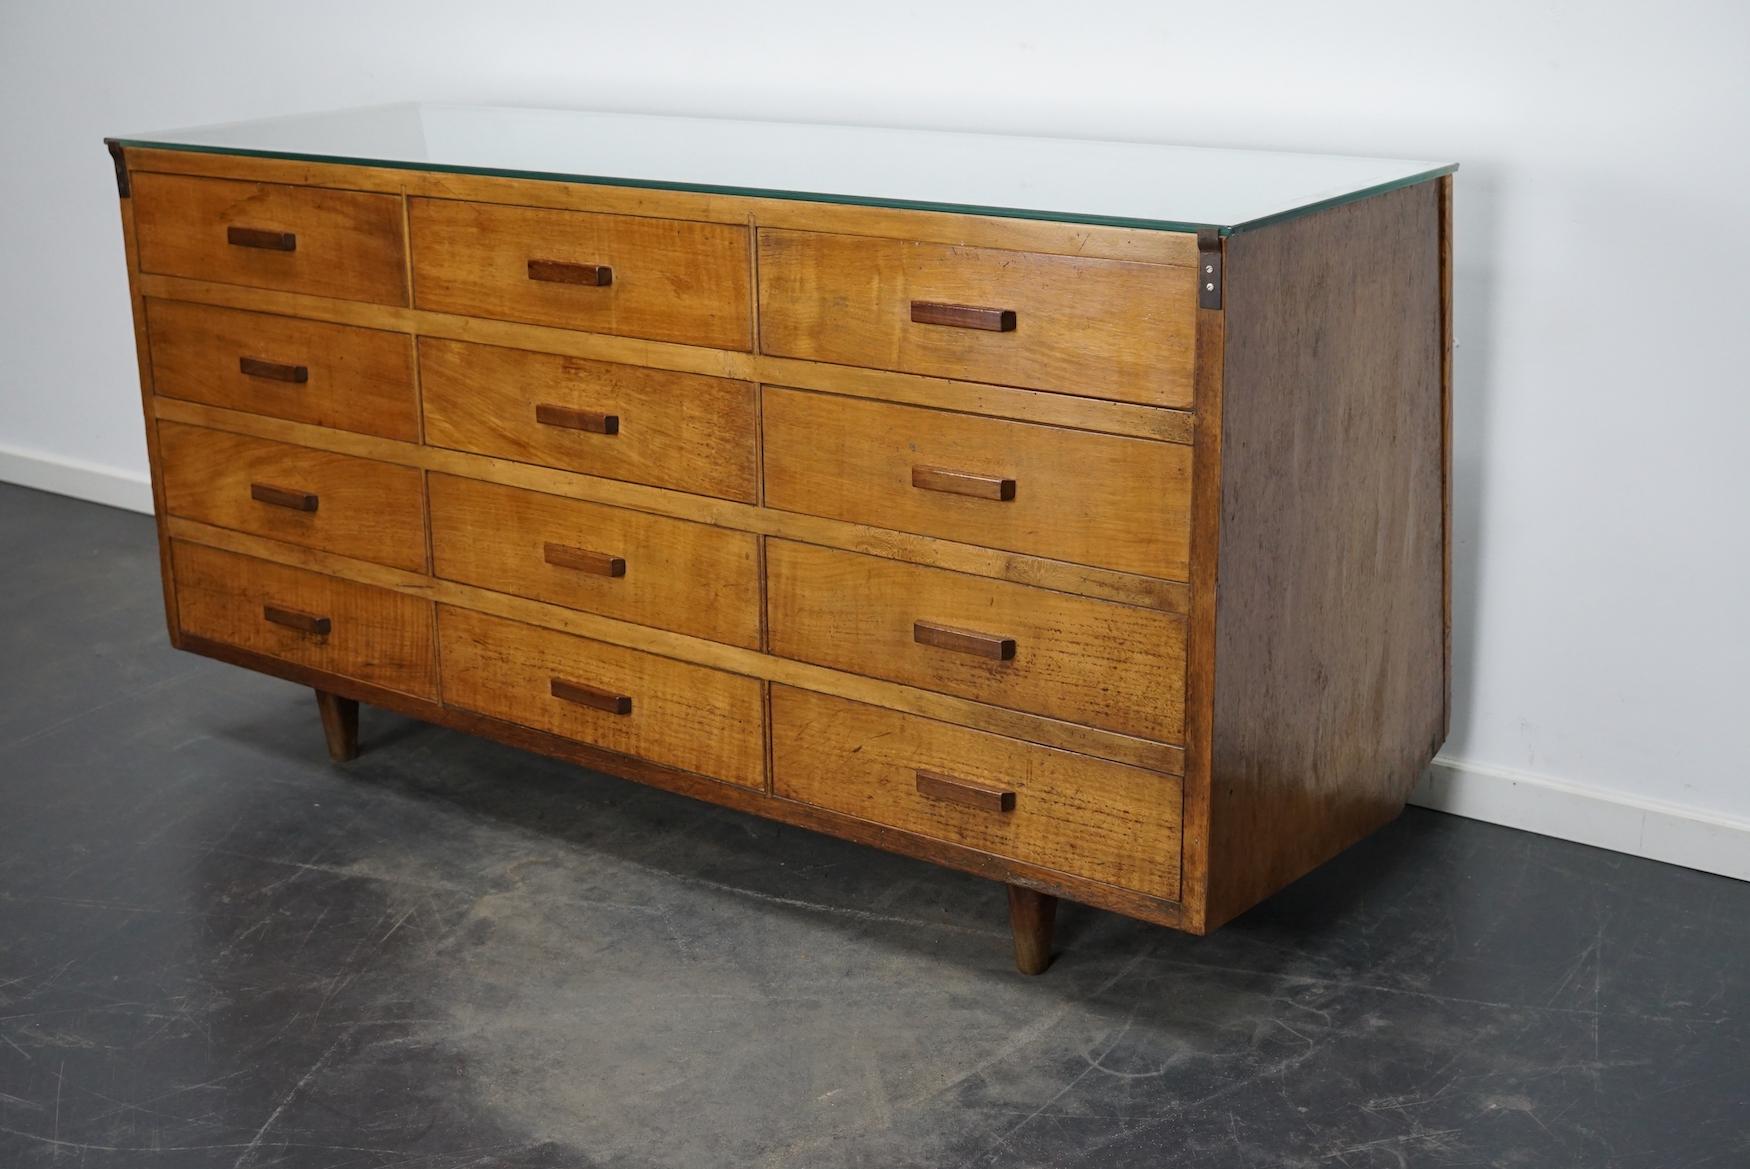 This vintage haberdashery shop counter dates from the 1960s and was made in Spain. It features a wooden frame, glass casing and drawers in walnut with hardwood handles.